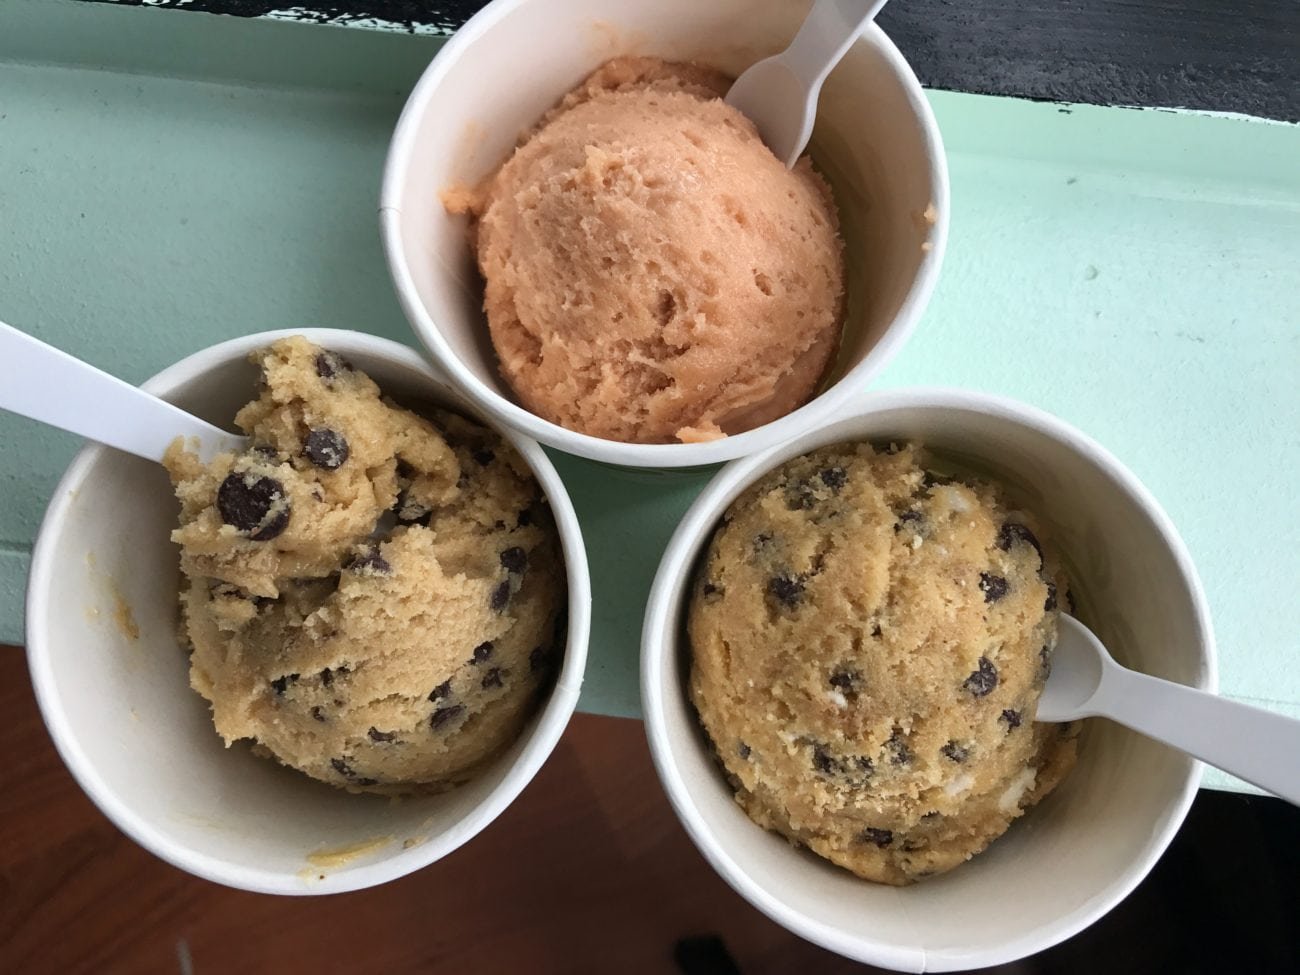 9 Reasons To Visit Doughlicious Yummy's, A Cookie Dough CafÃ© 25